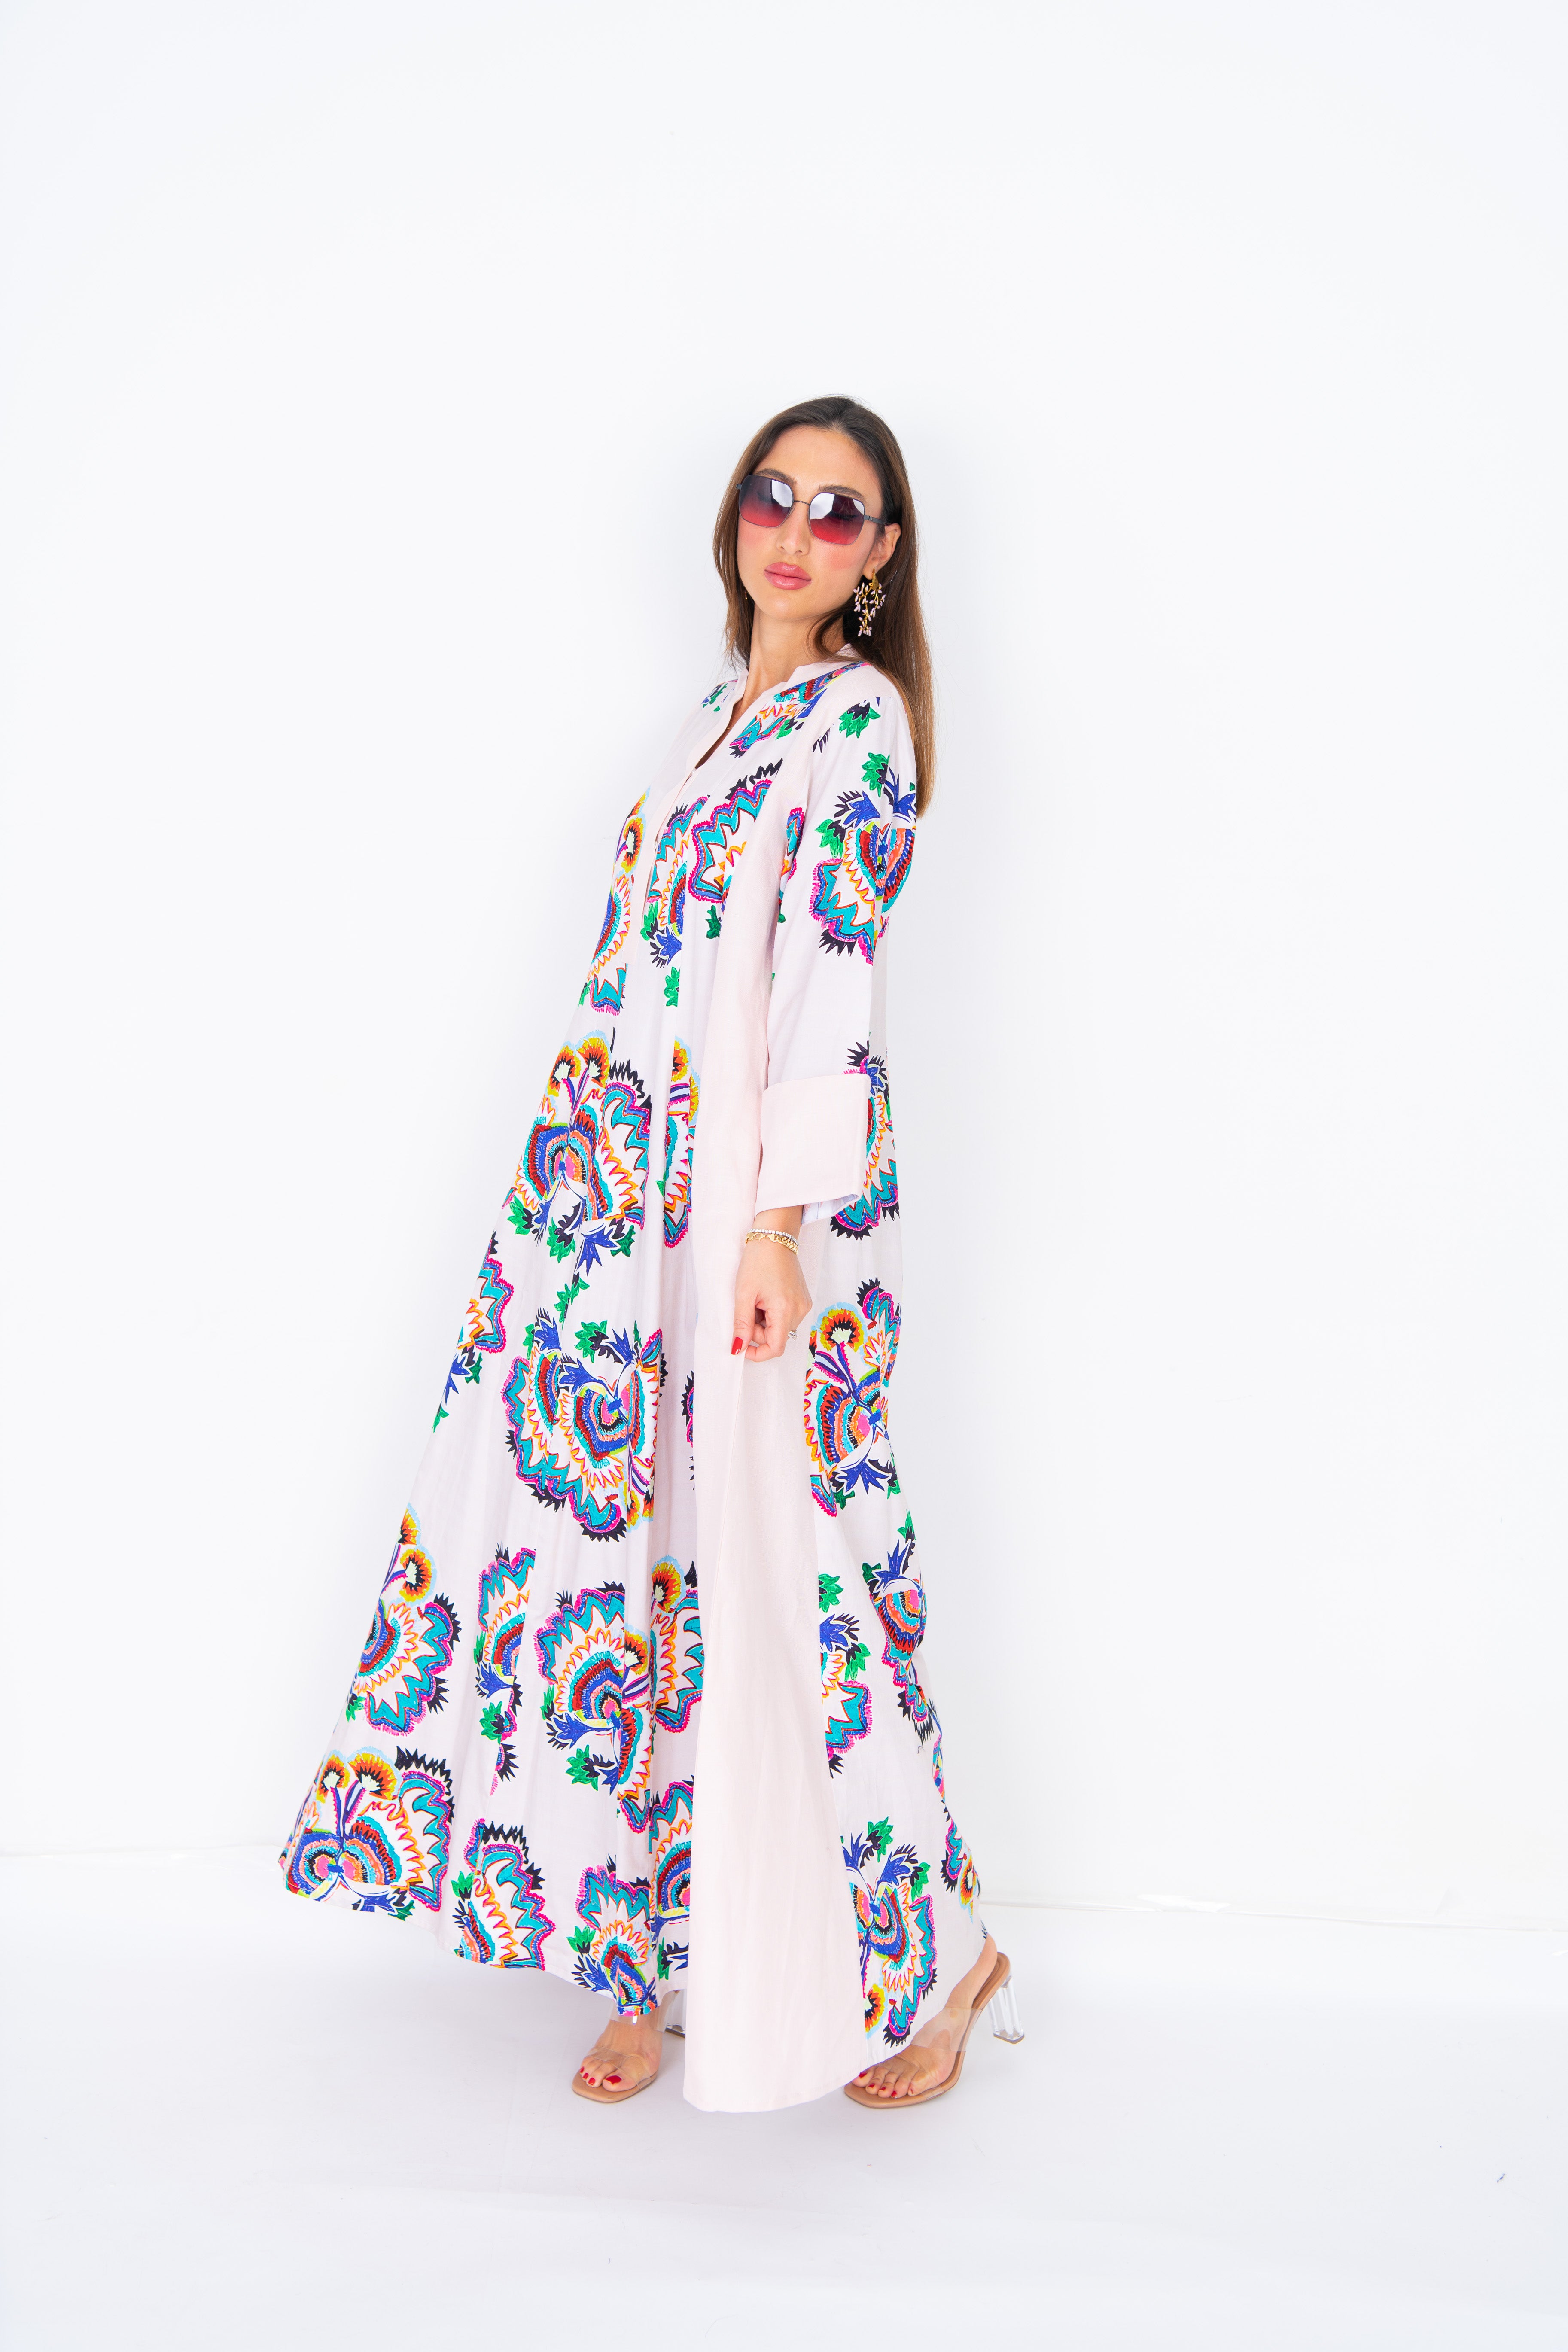 Lollibuter Abaya: Whimsical White with Colorful Embroidery